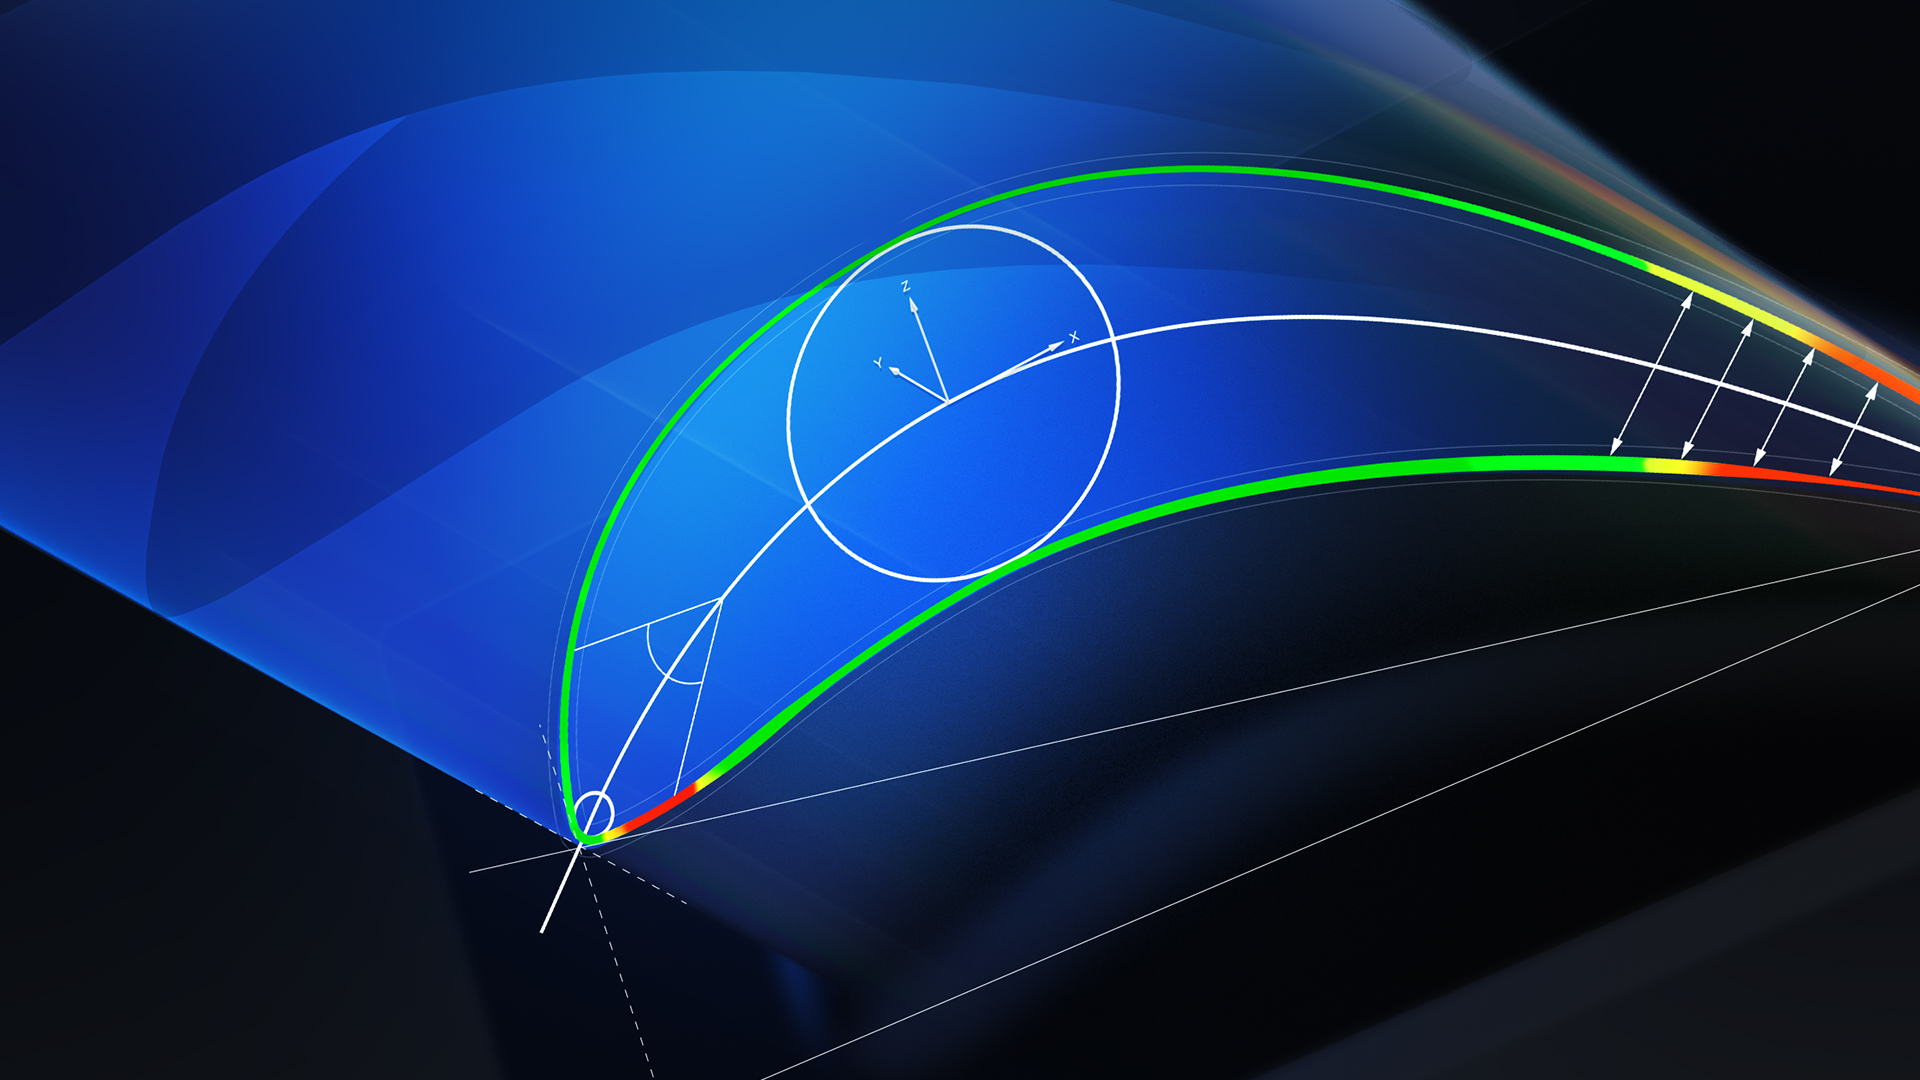 ZEISS INSPECT Airfoil: Dimensional inspection on the cross section of an airfoil 